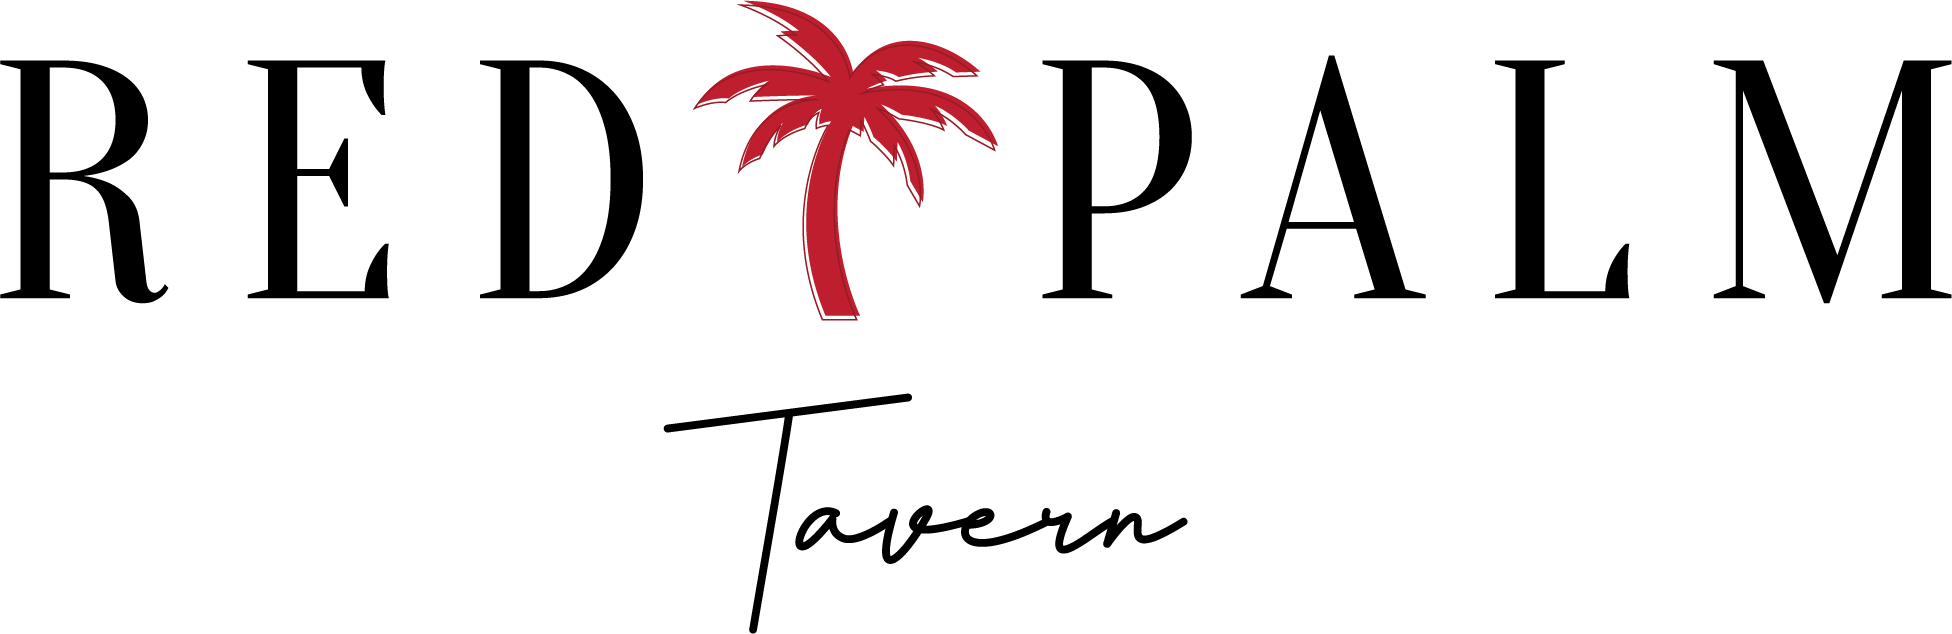 Red Palm Tavern logo top - Homepage